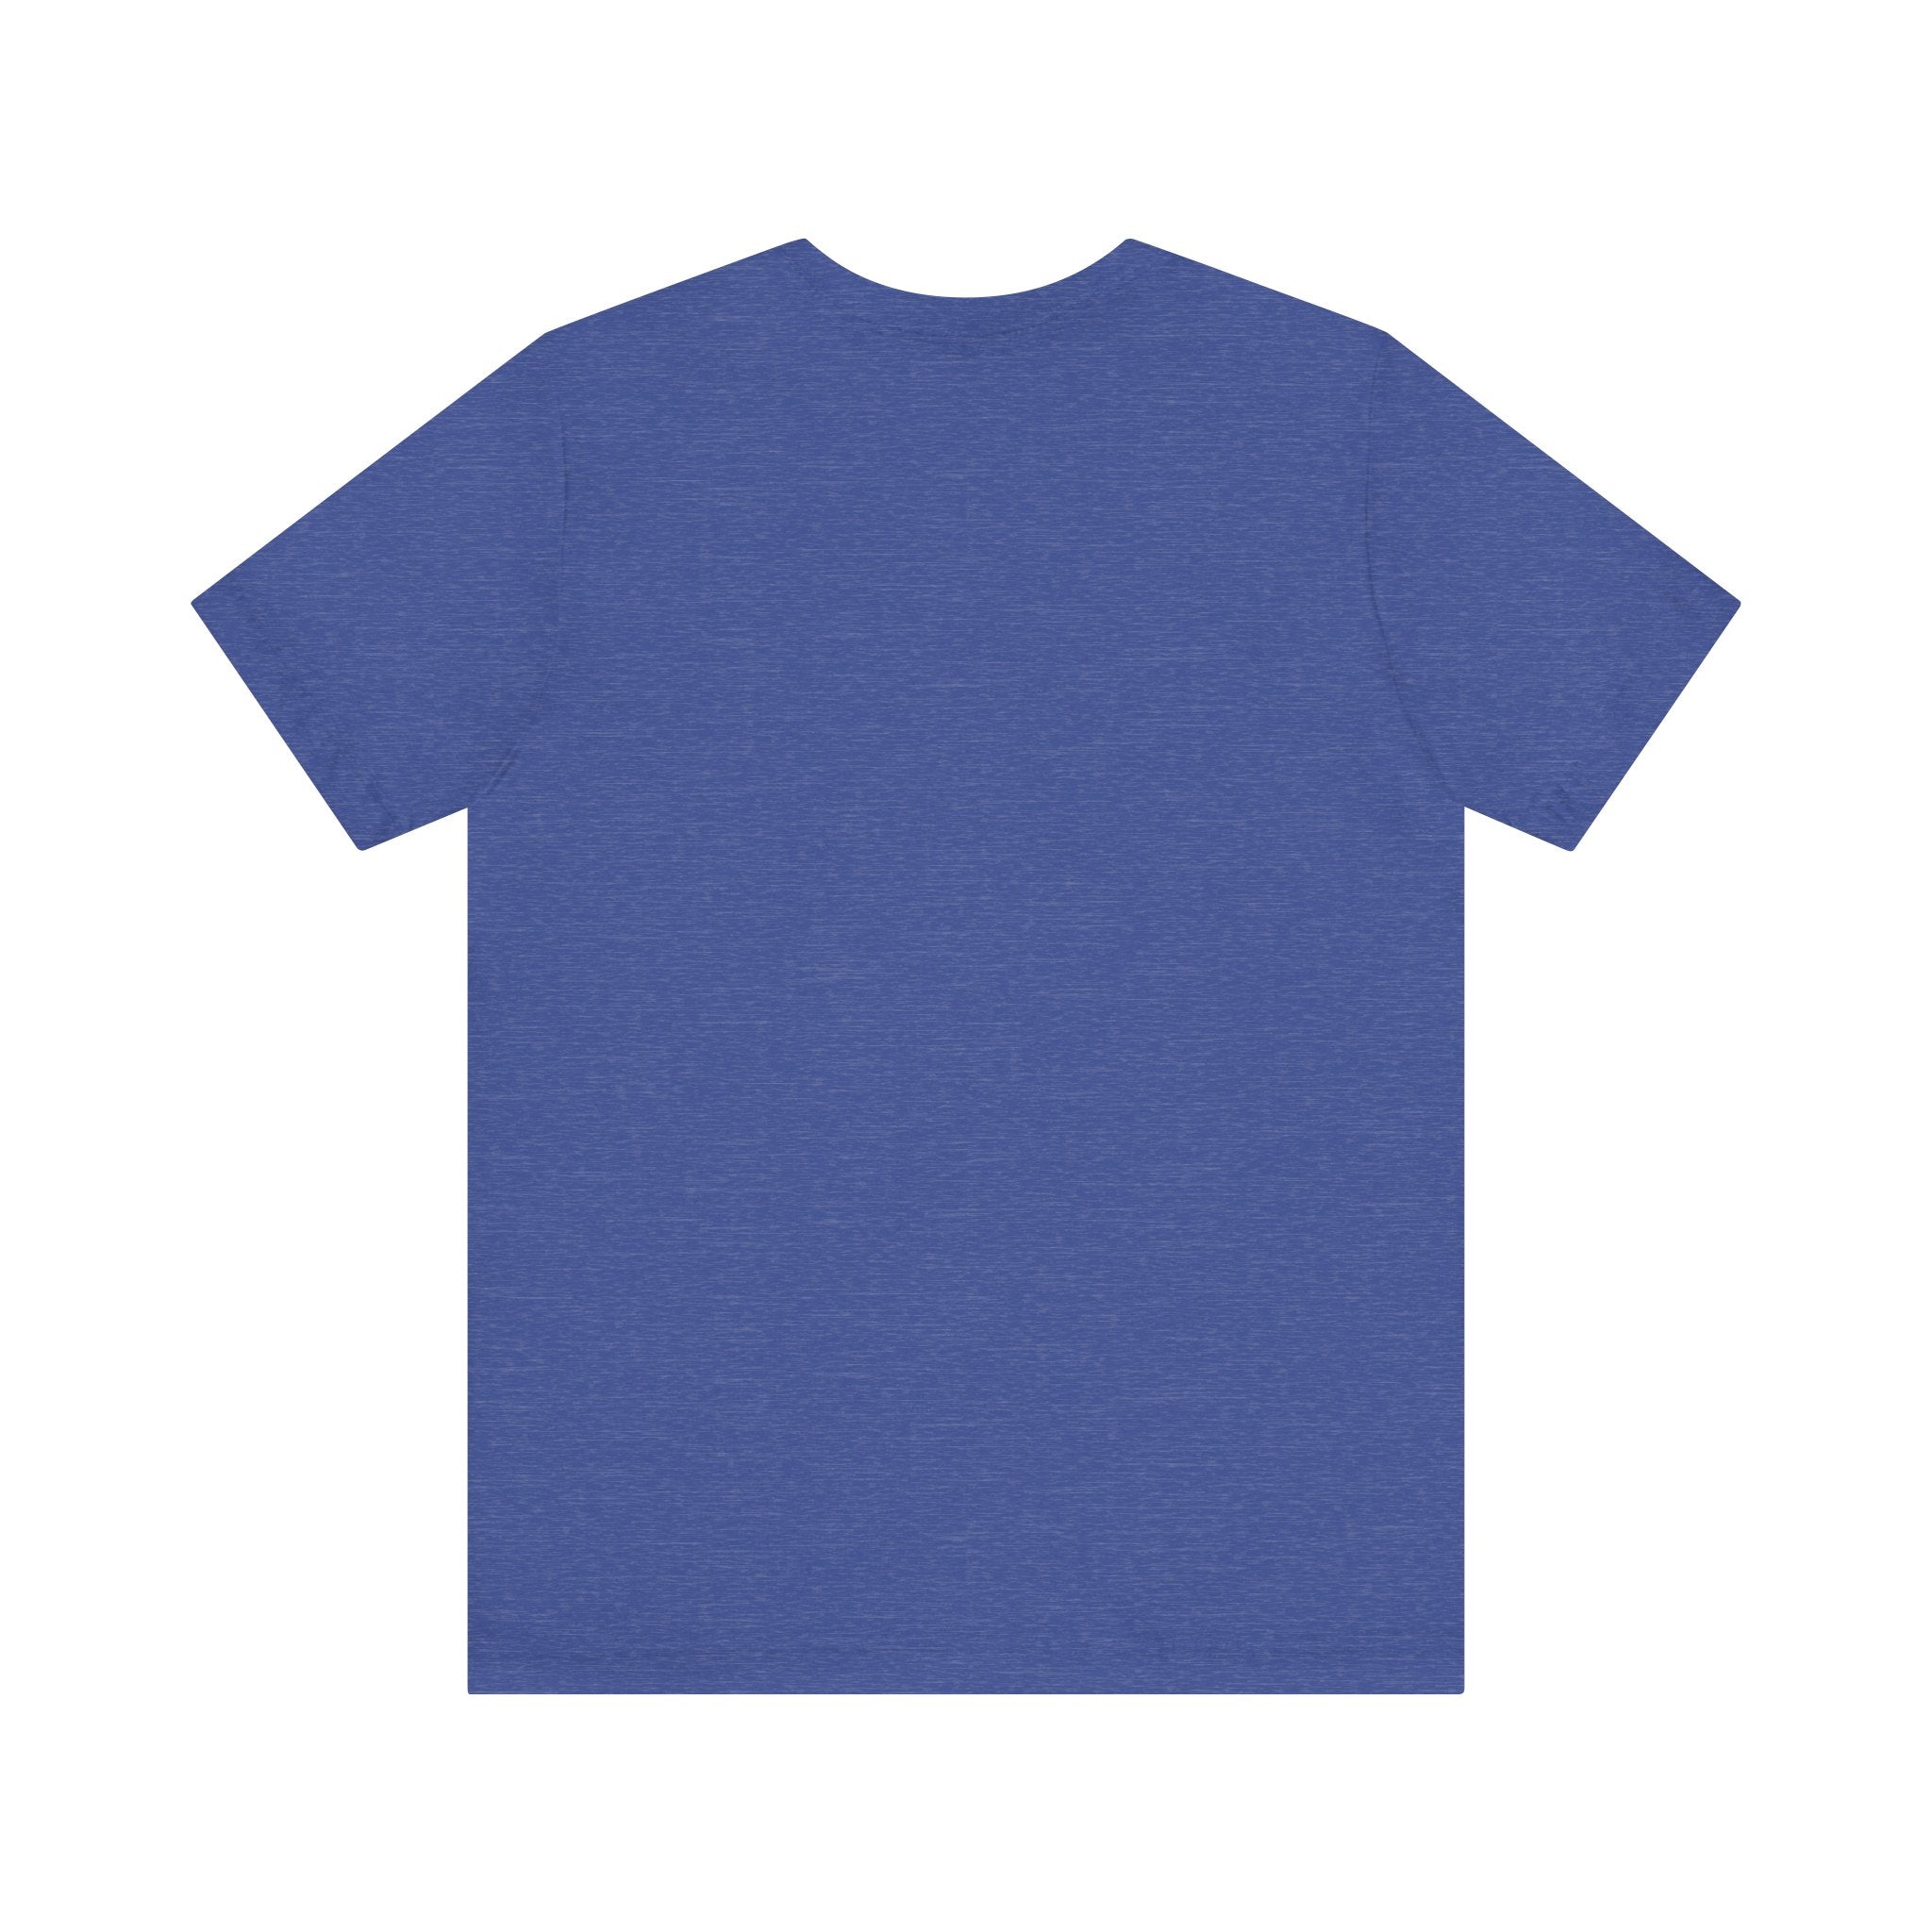 Catch the Waves Surfing T-Shirt: Blue unisex jersey tee with white logo printed on front